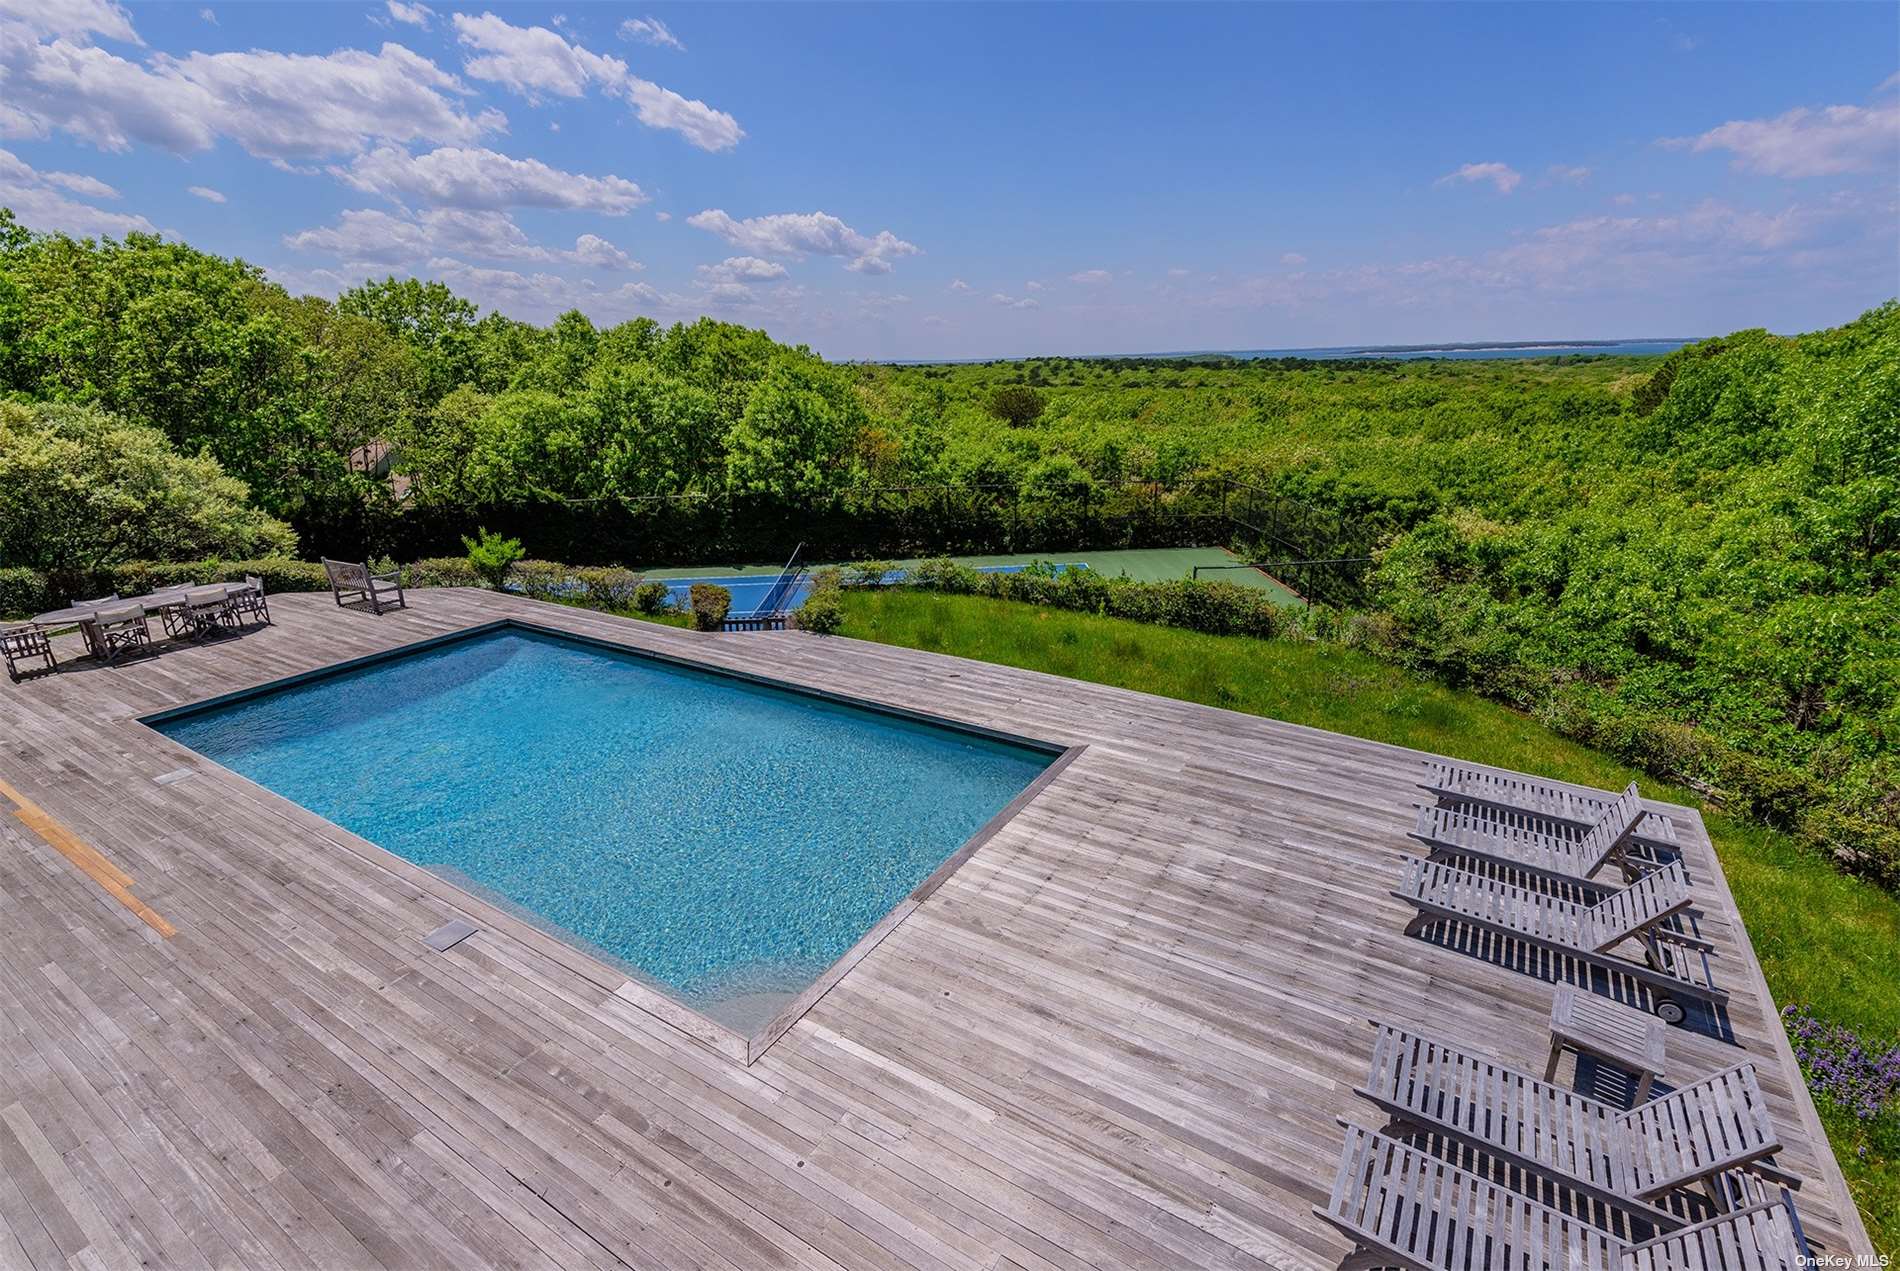 Property for Sale at 28 Deer Ridge Trail Trl, Water Mill, Hamptons, NY - Bedrooms: 6 
Bathrooms: 5  - $3,499,000